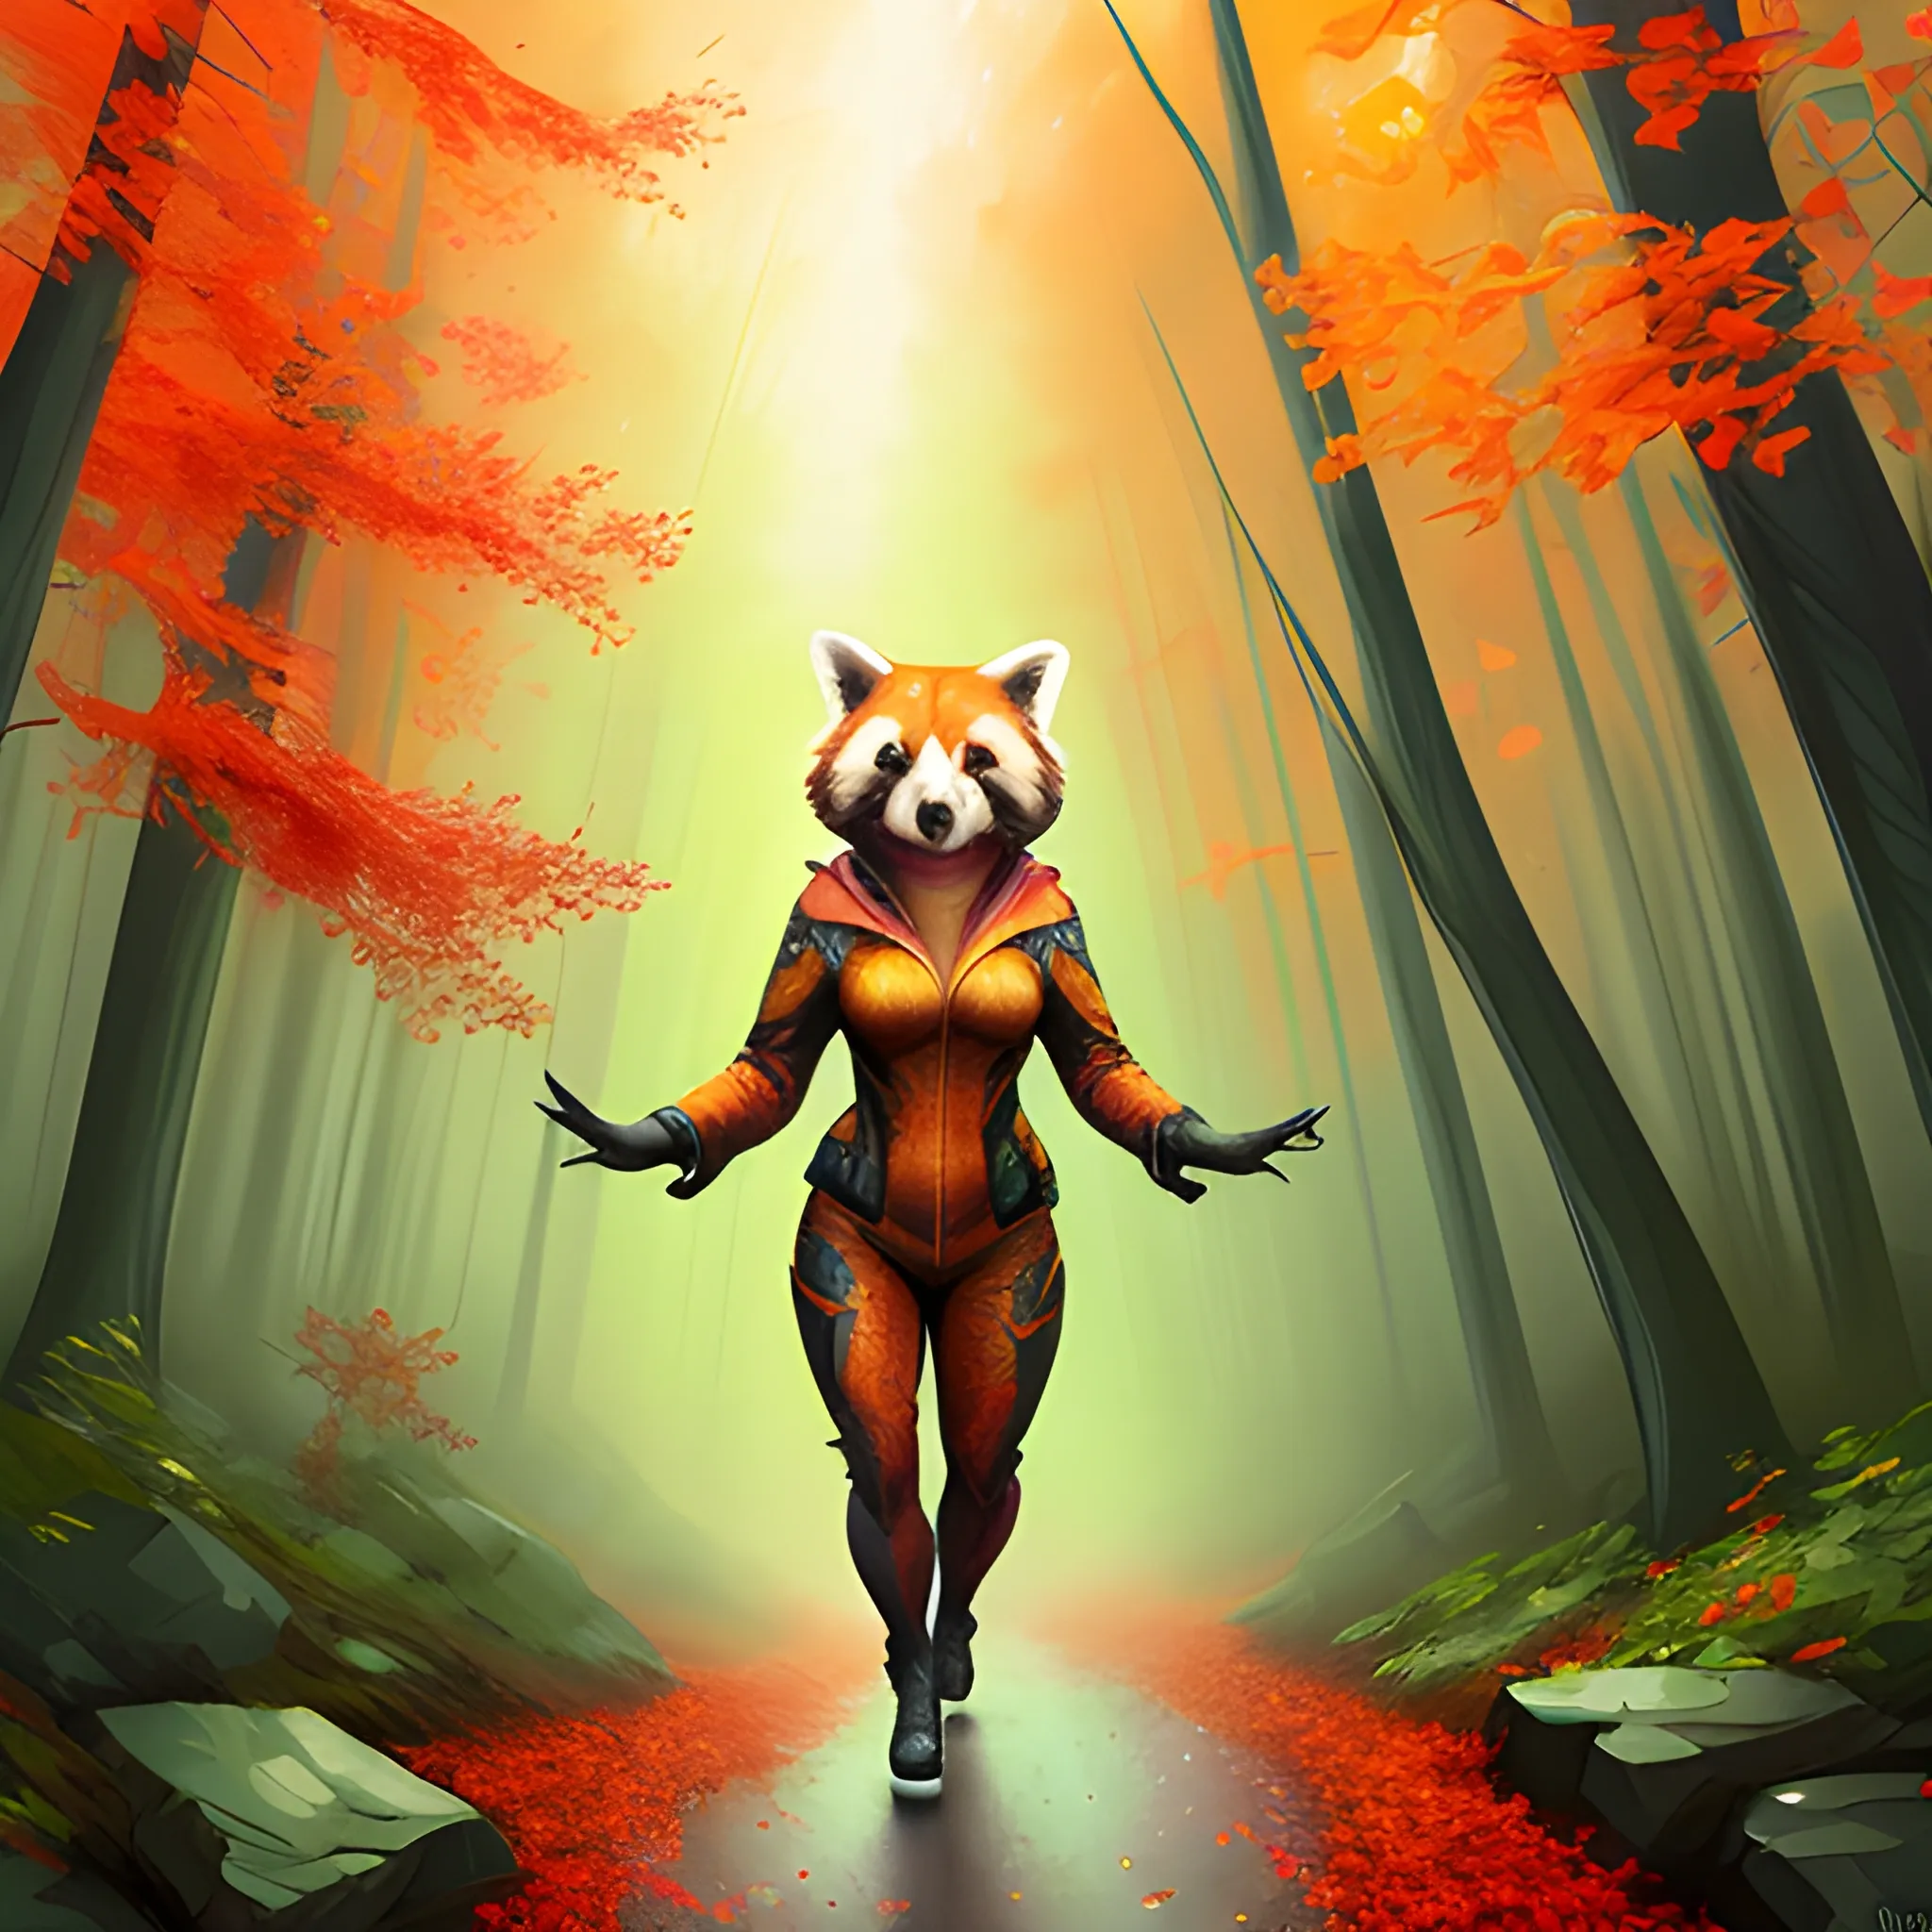 Strybk, happy red panda in floral print hoodie, full body walks through the forest((in the background is a forest))
Michael Garmash, Daniel F. Gerhartz, strebk style, night, dreamy warm lighting, volumetric lighting,
pulp adventure style, liquid acrylic, dynamic gradients, deep color, illustration, highly detailed vector curves,
simple, smooth and clean, vector art, smoothness, Johan Grenier, character design, 3D shading, cinematography, ornate pattern,
elegant organic framing, hyperrealism, posterization, masterpiece collection, bright rich colors, partial shade, wet gouache, 
children's storybook style, muted colors, watercolor style
